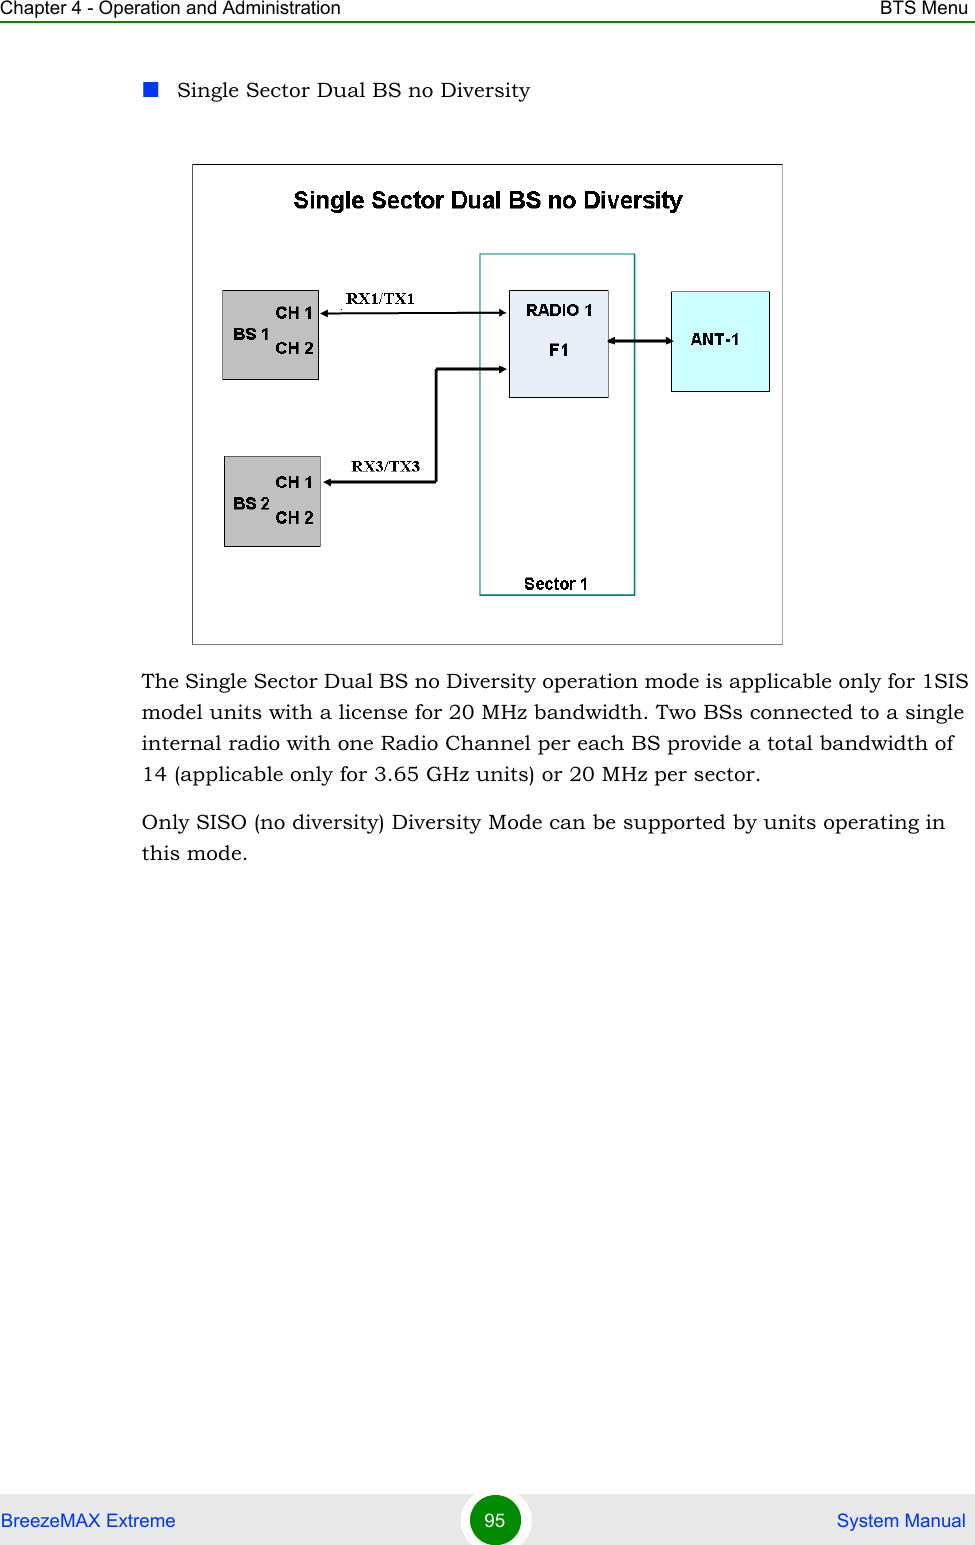 Chapter 4 - Operation and Administration BTS MenuBreezeMAX Extreme 95  System ManualSingle Sector Dual BS no DiversityThe Single Sector Dual BS no Diversity operation mode is applicable only for 1SIS model units with a license for 20 MHz bandwidth. Two BSs connected to a single internal radio with one Radio Channel per each BS provide a total bandwidth of 14 (applicable only for 3.65 GHz units) or 20 MHz per sector.Only SISO (no diversity) Diversity Mode can be supported by units operating in this mode.